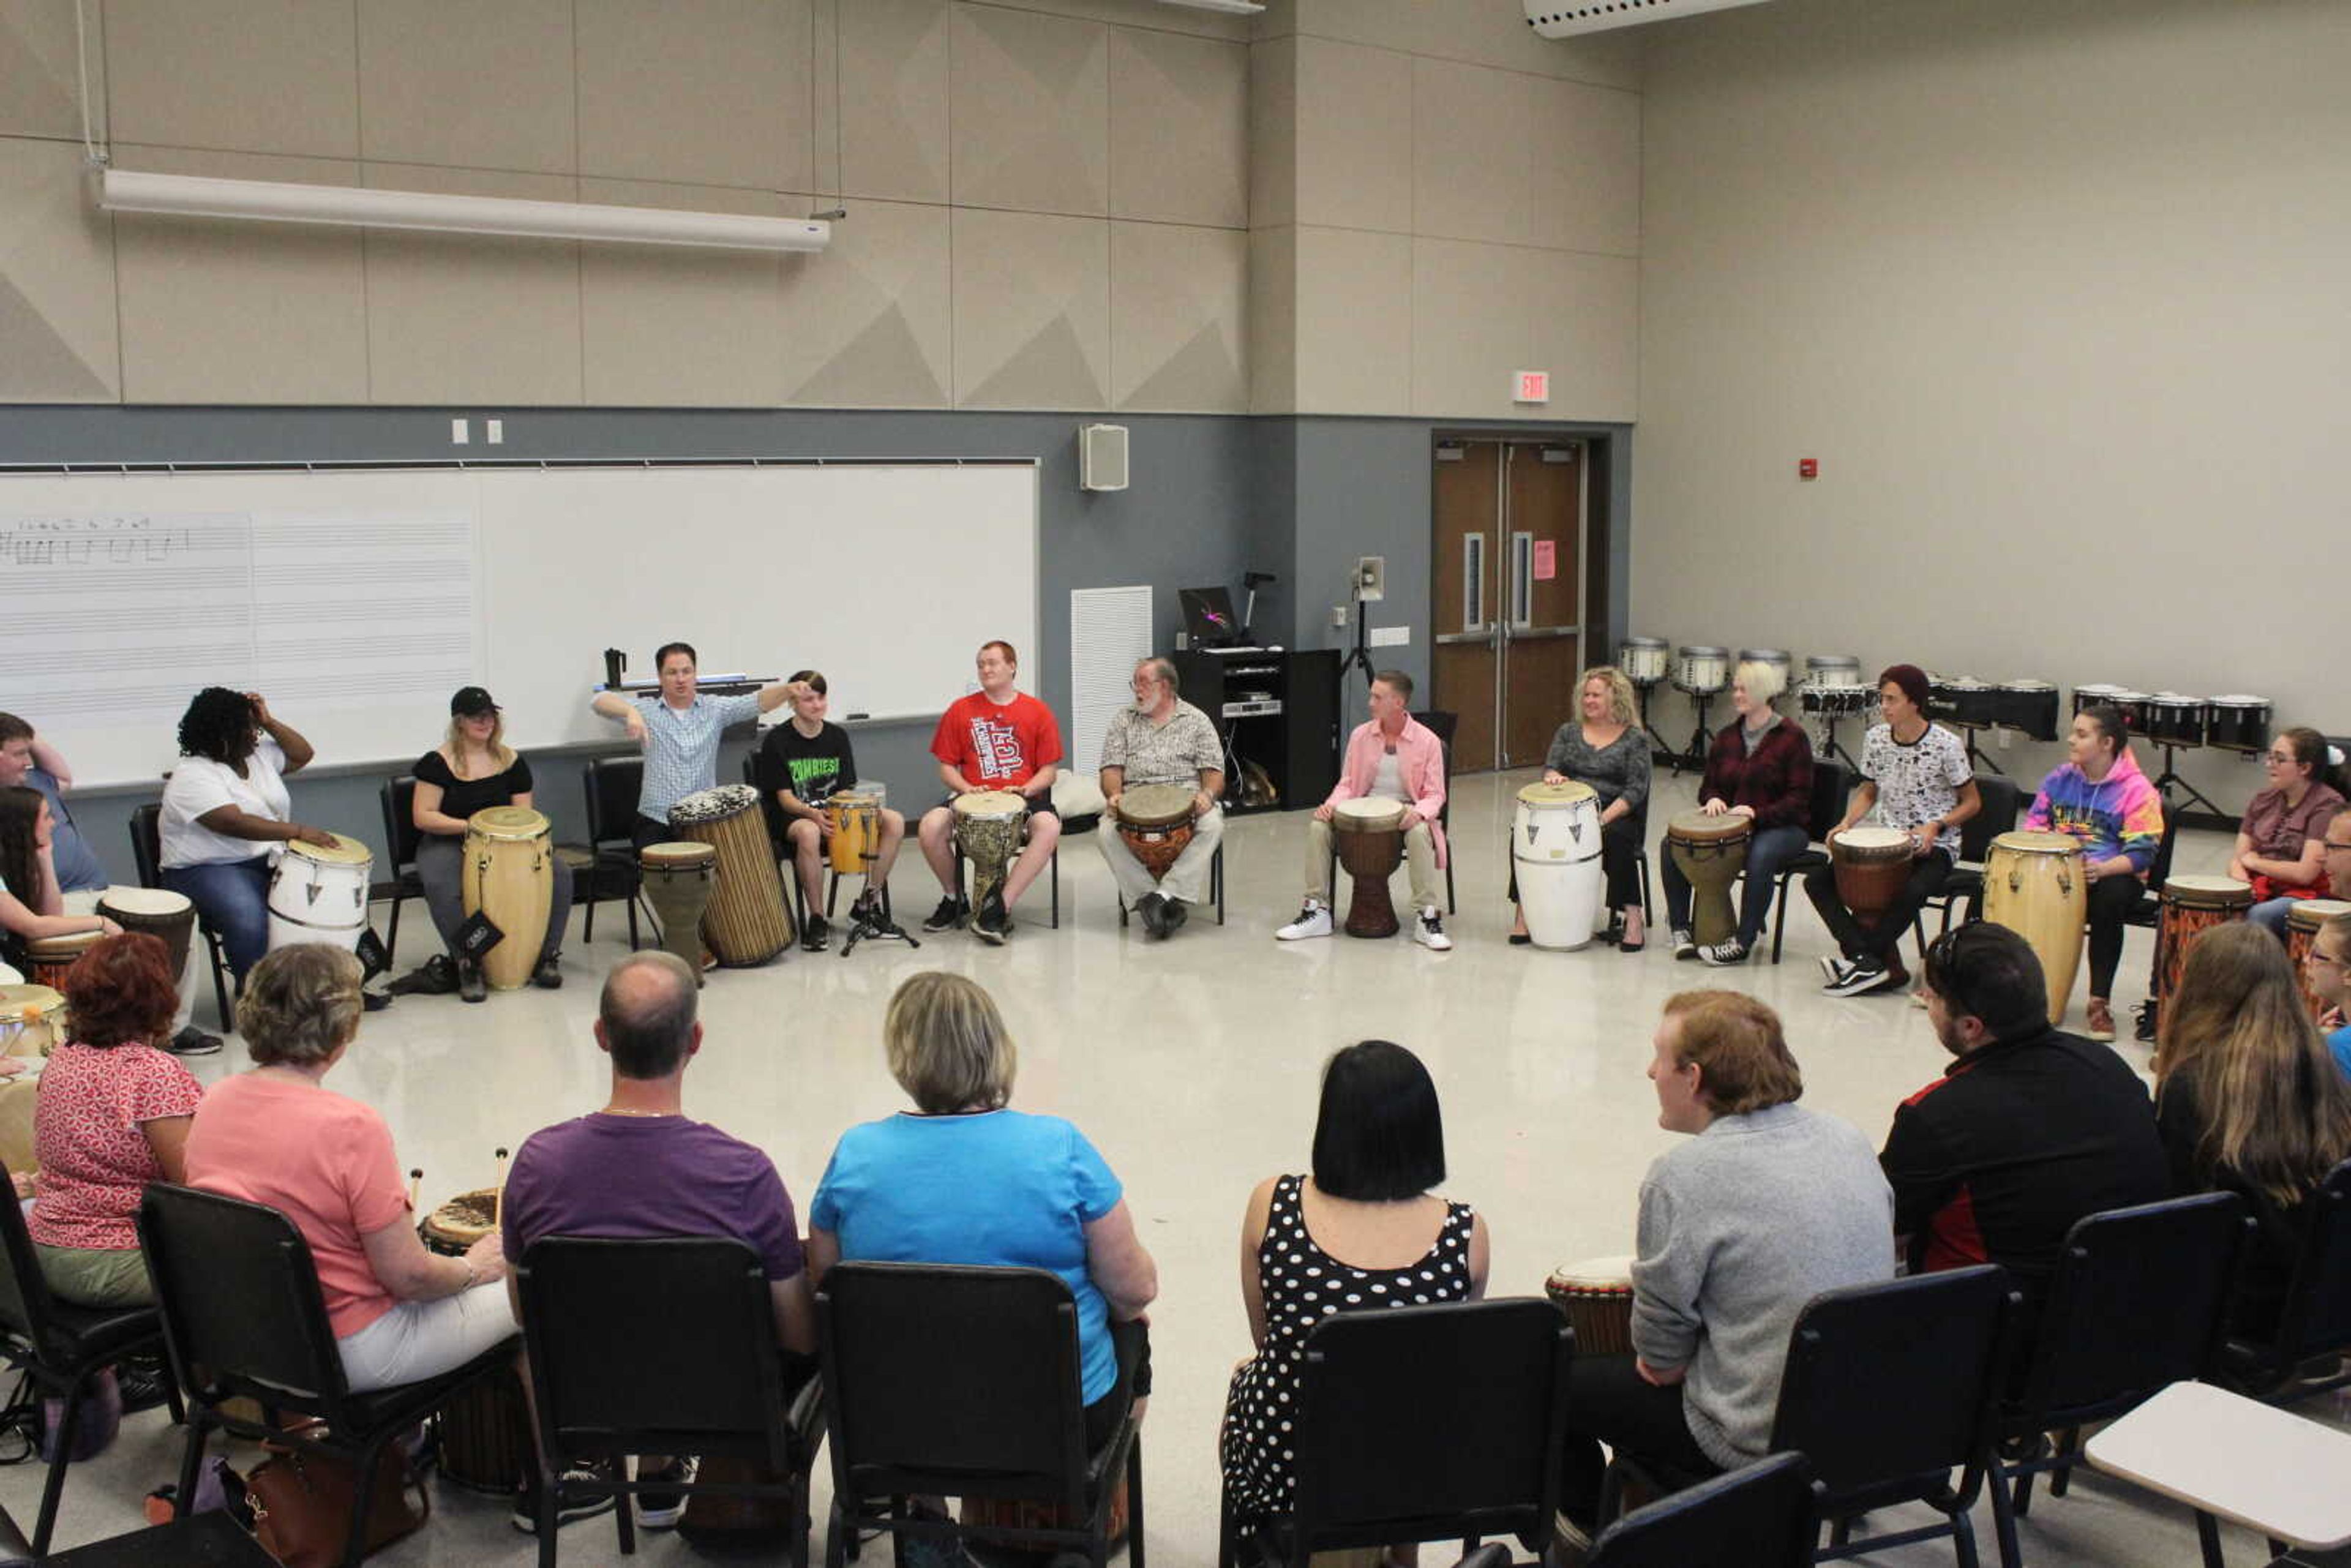 Southeast director of percussion Shane Mizicko (center) leads the Drum Circle event on Sept. 11.